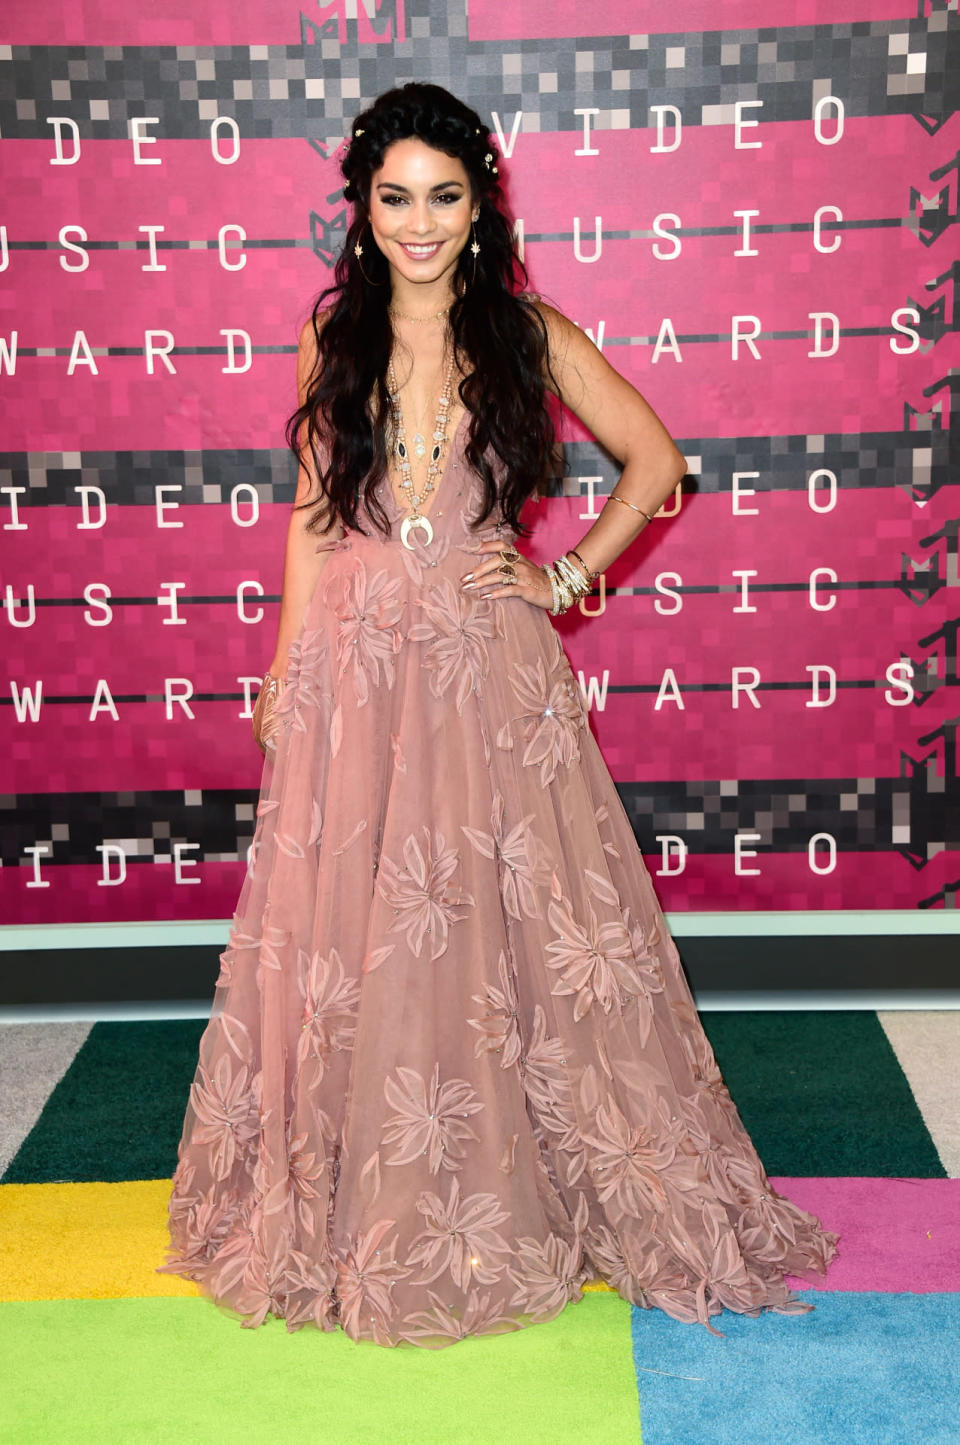 Dropping jaws in a fairytale-esque rose pink floral gown, Vanessa Hudgens also managed to wear an impressive 28 pieces of jewellery for her red carpet look. [Photo: Getty]